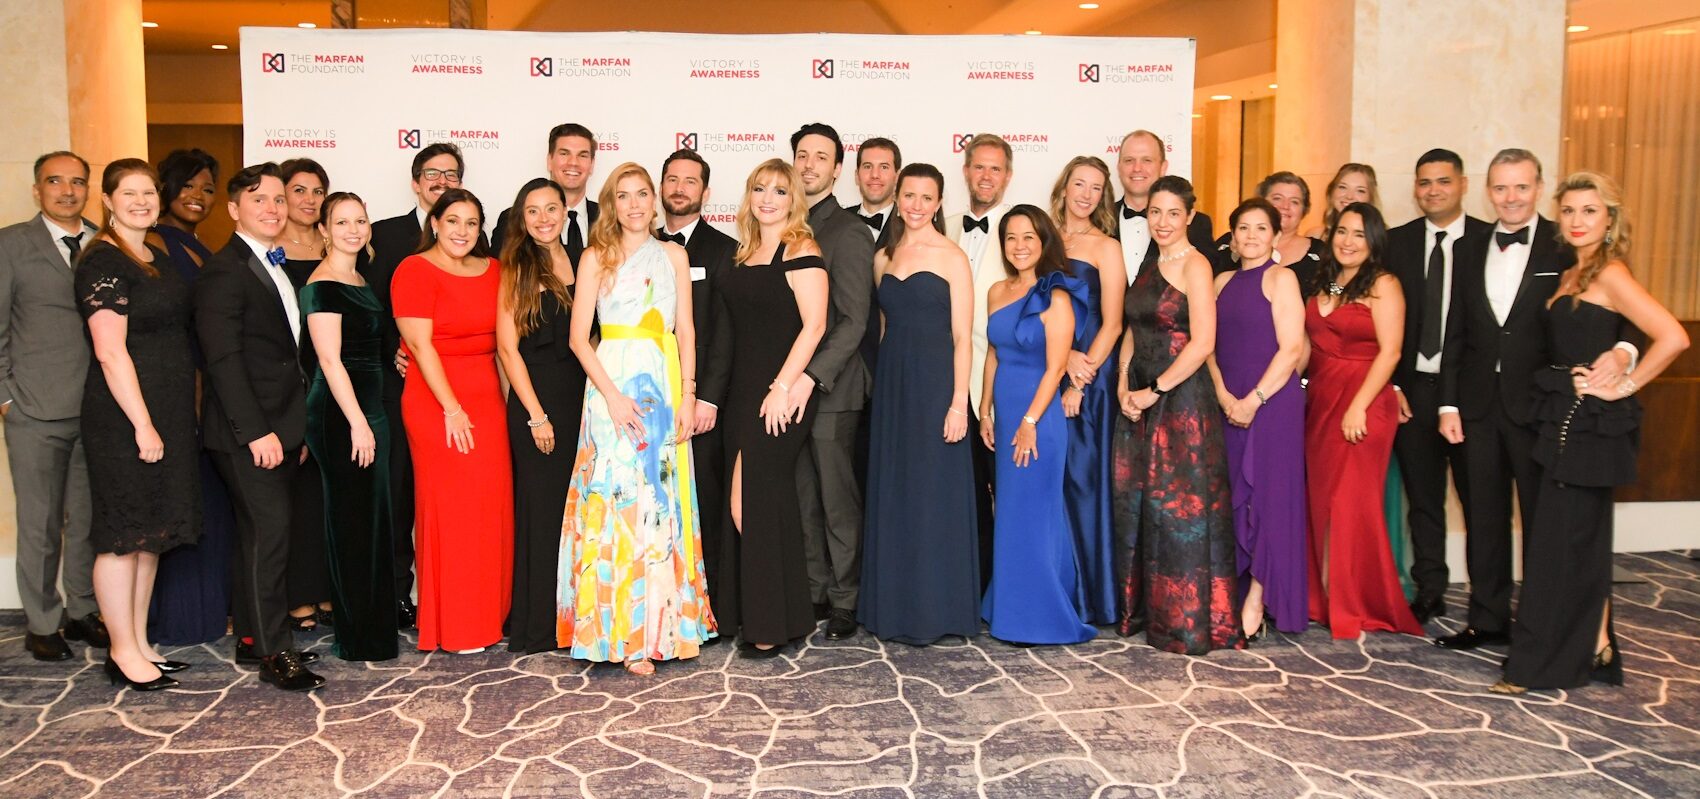 Heartworks Gala Houston is the Talk of the Town Marfan Foundation